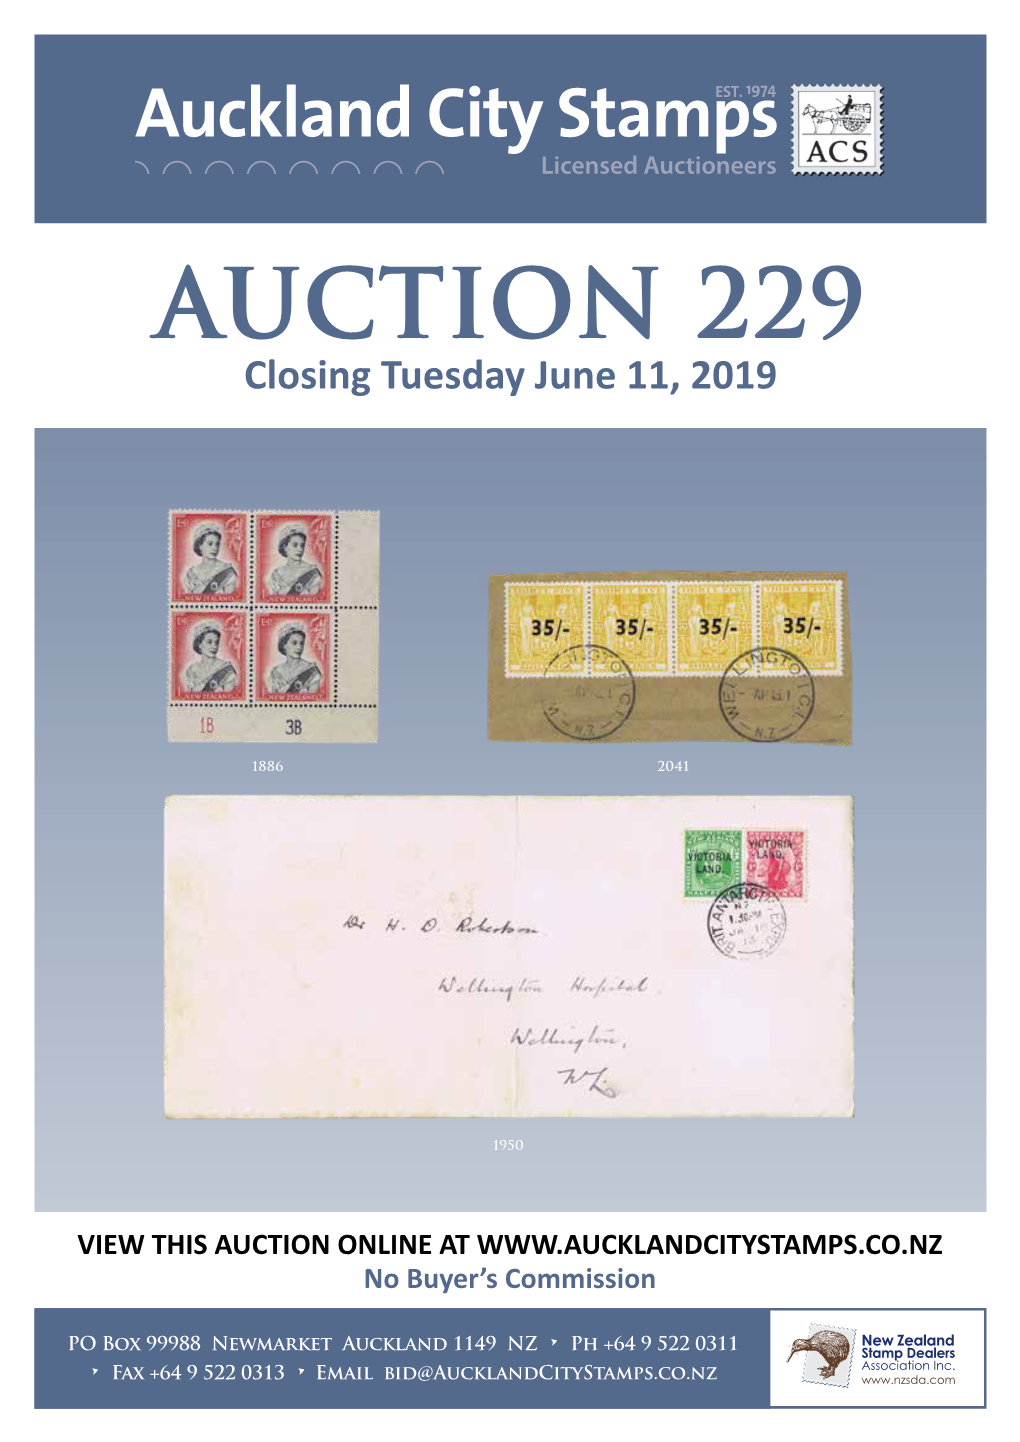 AUCTION 229 Closing Tuesday June 11, 2019